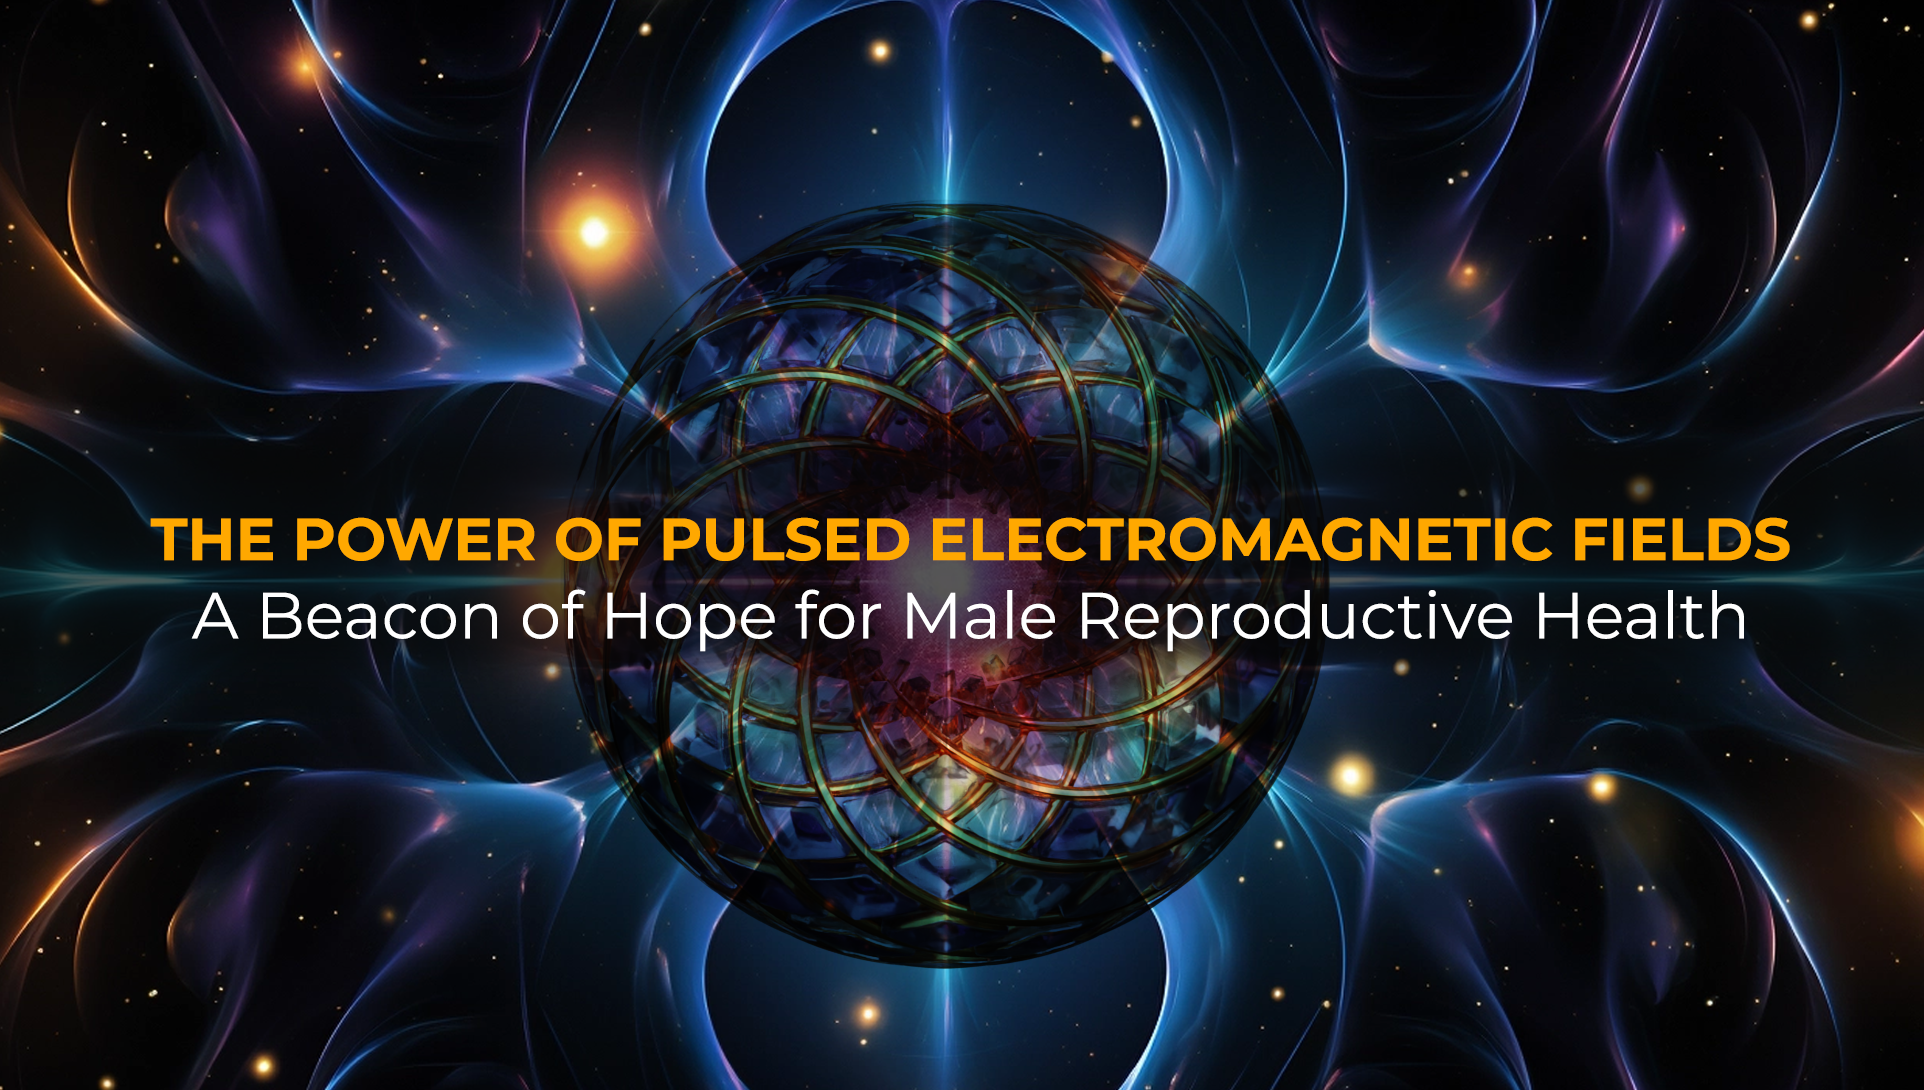 The Power of Pulsed Electromagnetic Fields: A Beacon of Hope for Male Reproductive Health